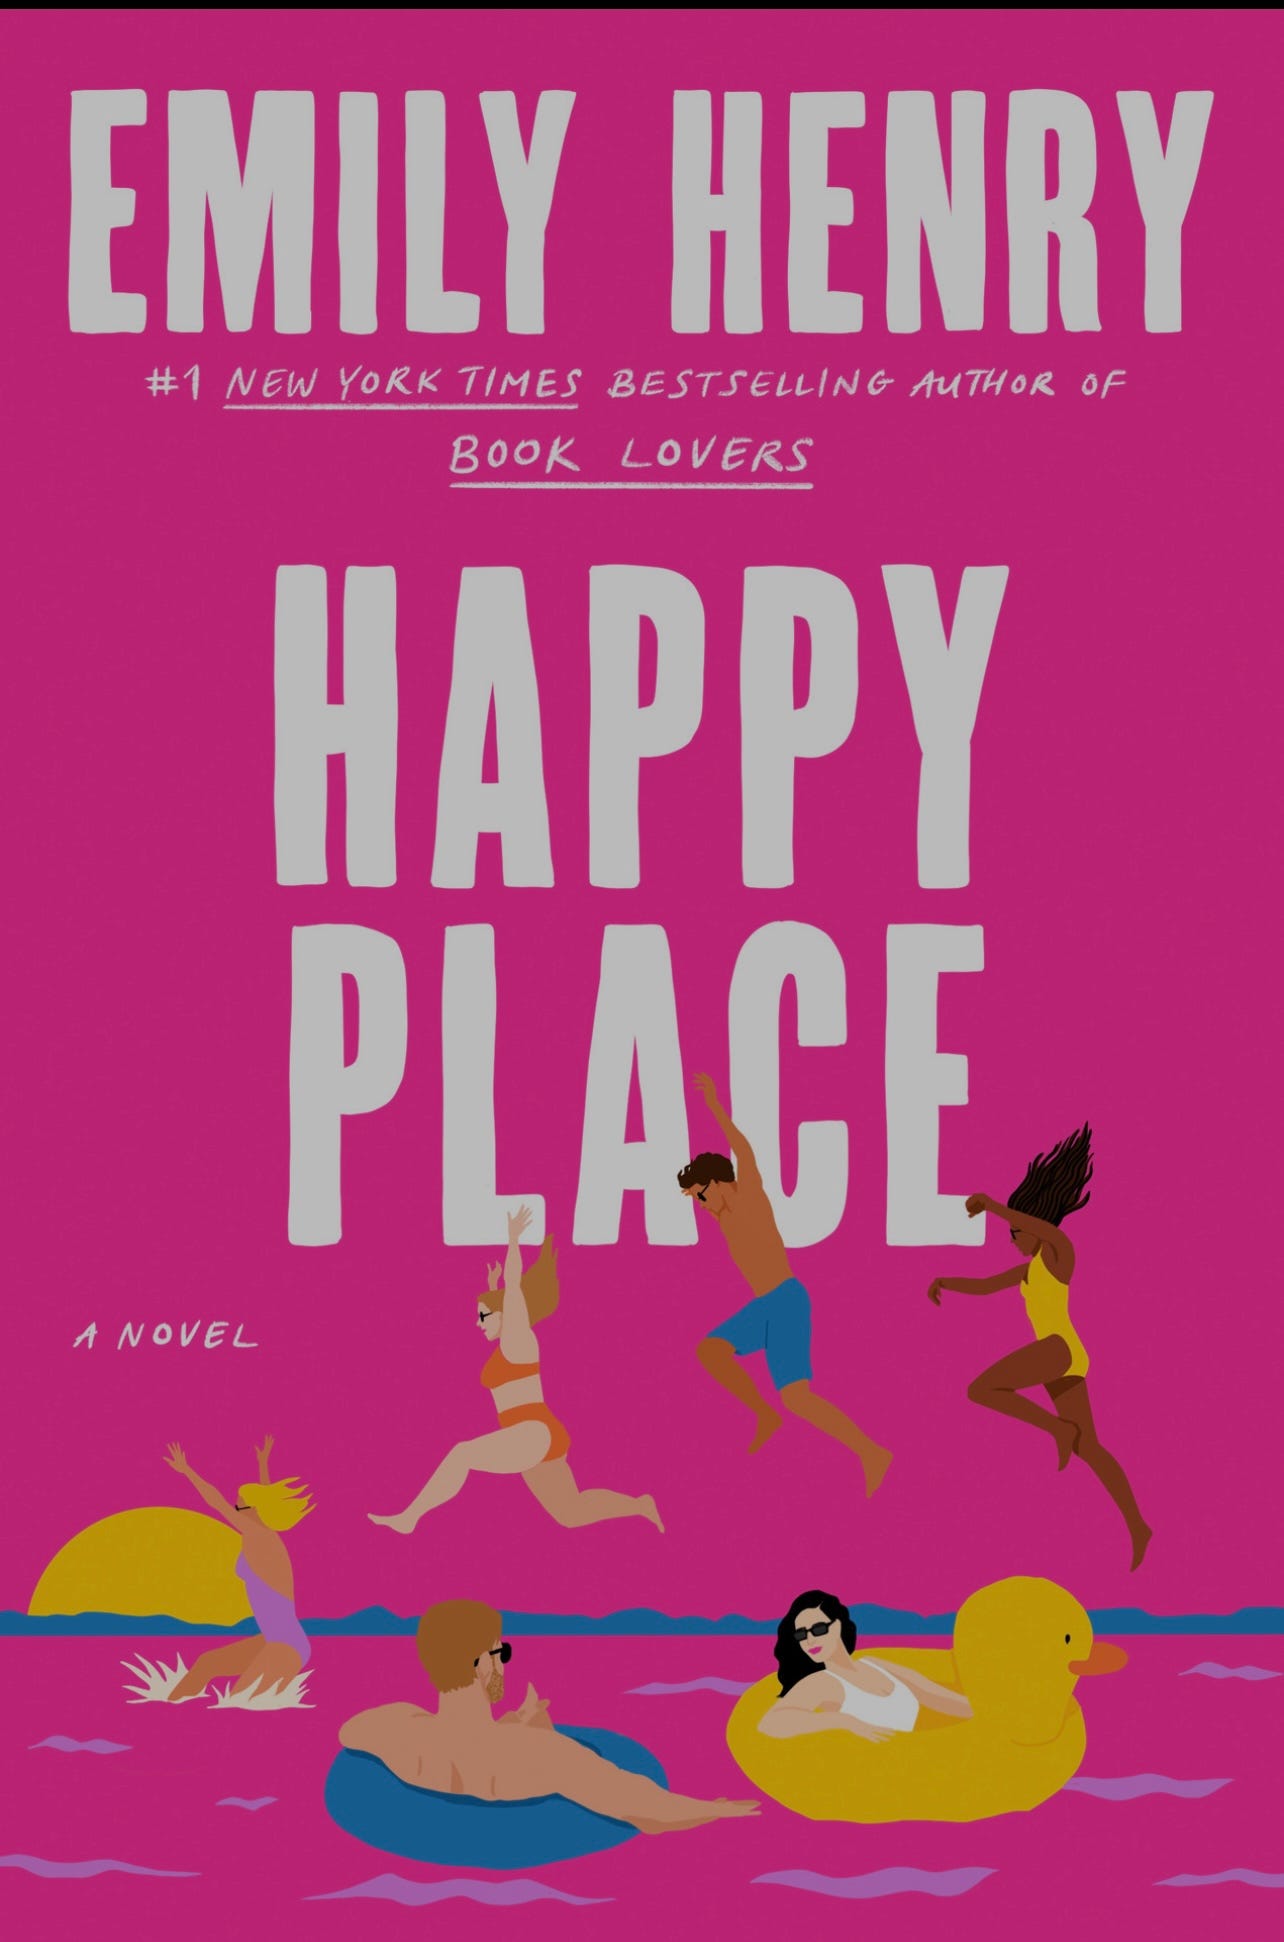 Review of the book Happy Place by Emily Henry, by Elaine Ramblings